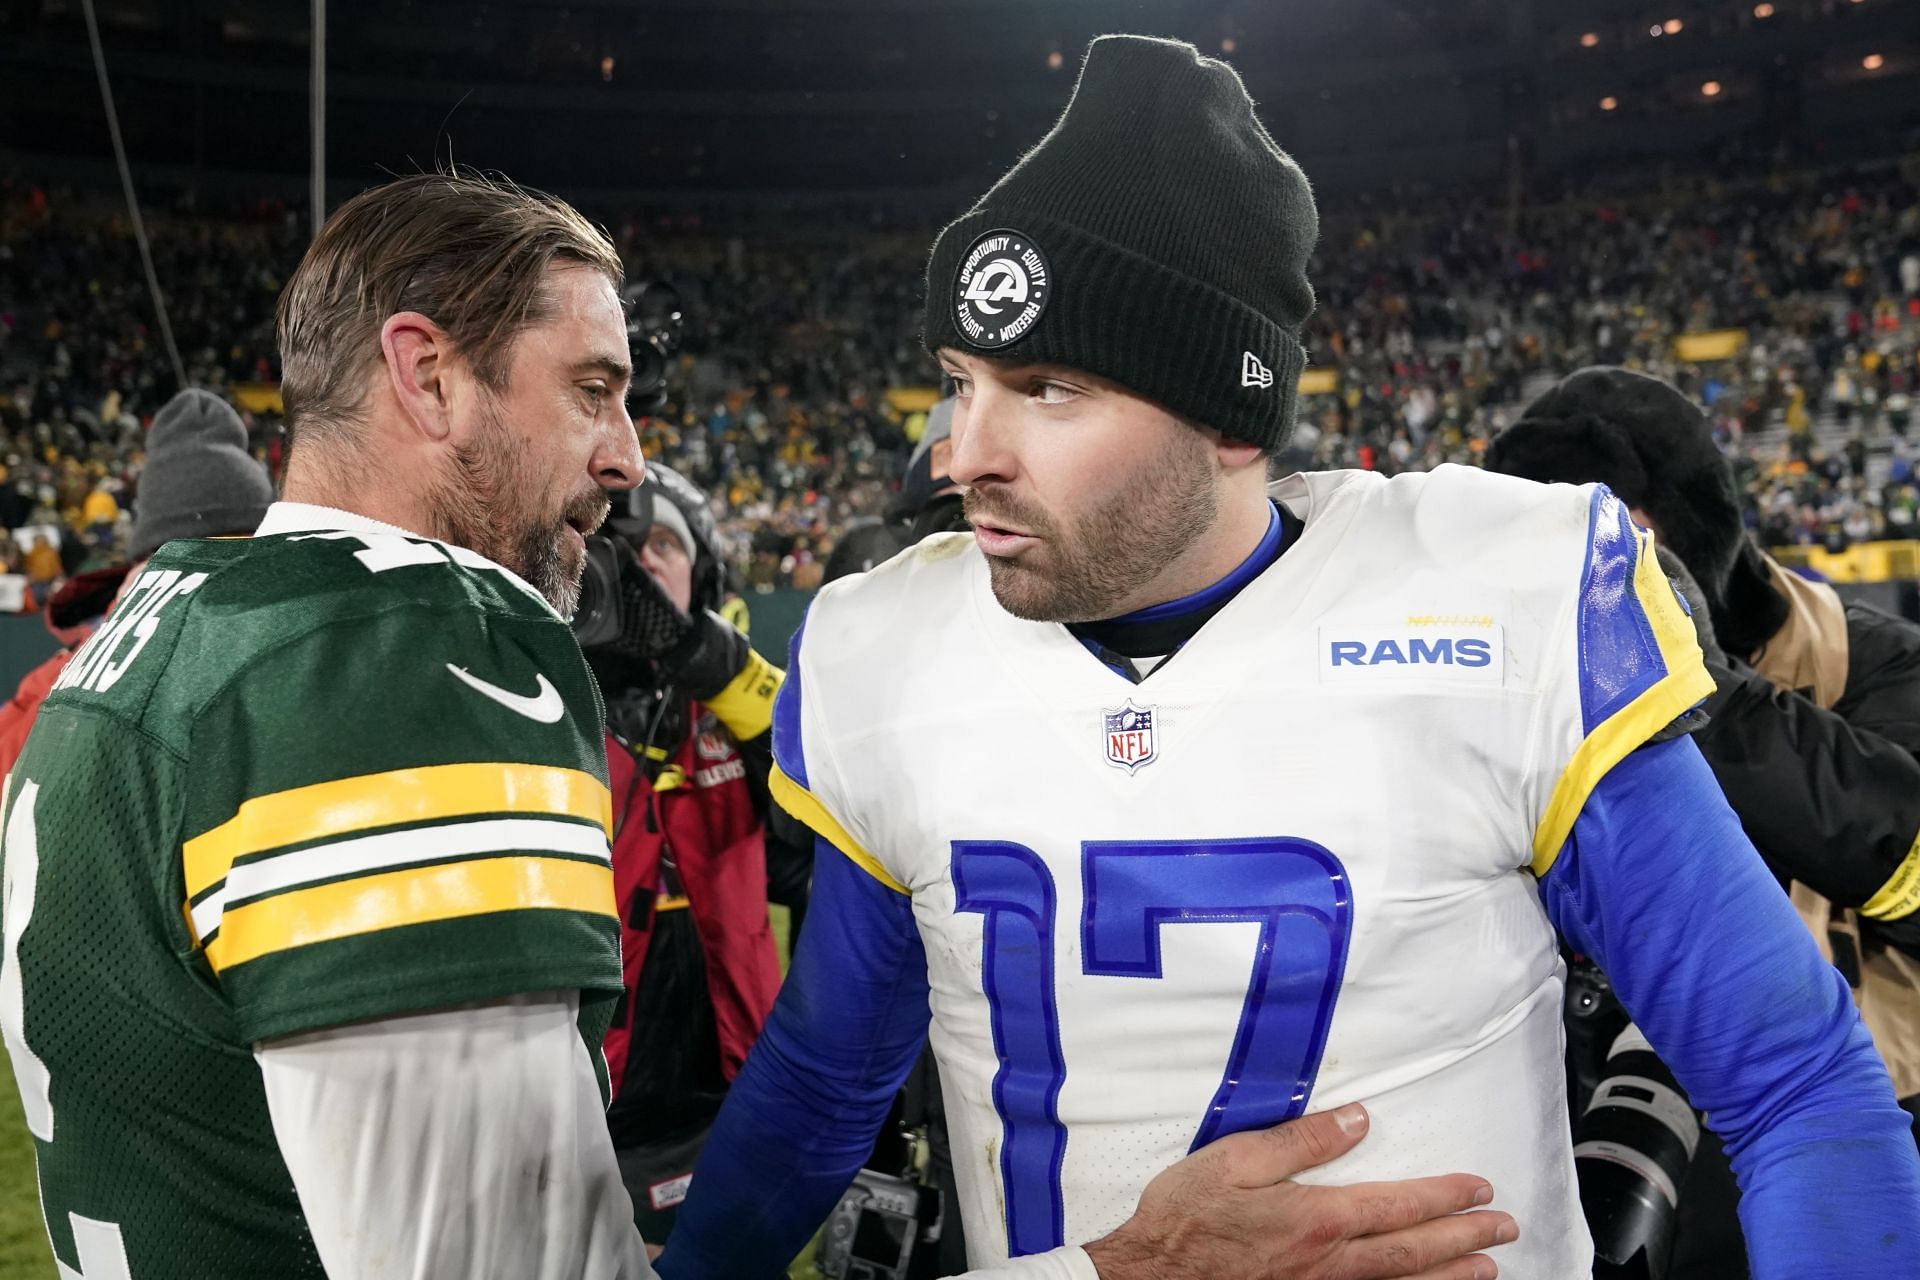 Aaron Rodgers and Baker Mayfield: Los Angeles Rams v Green Bay Packers